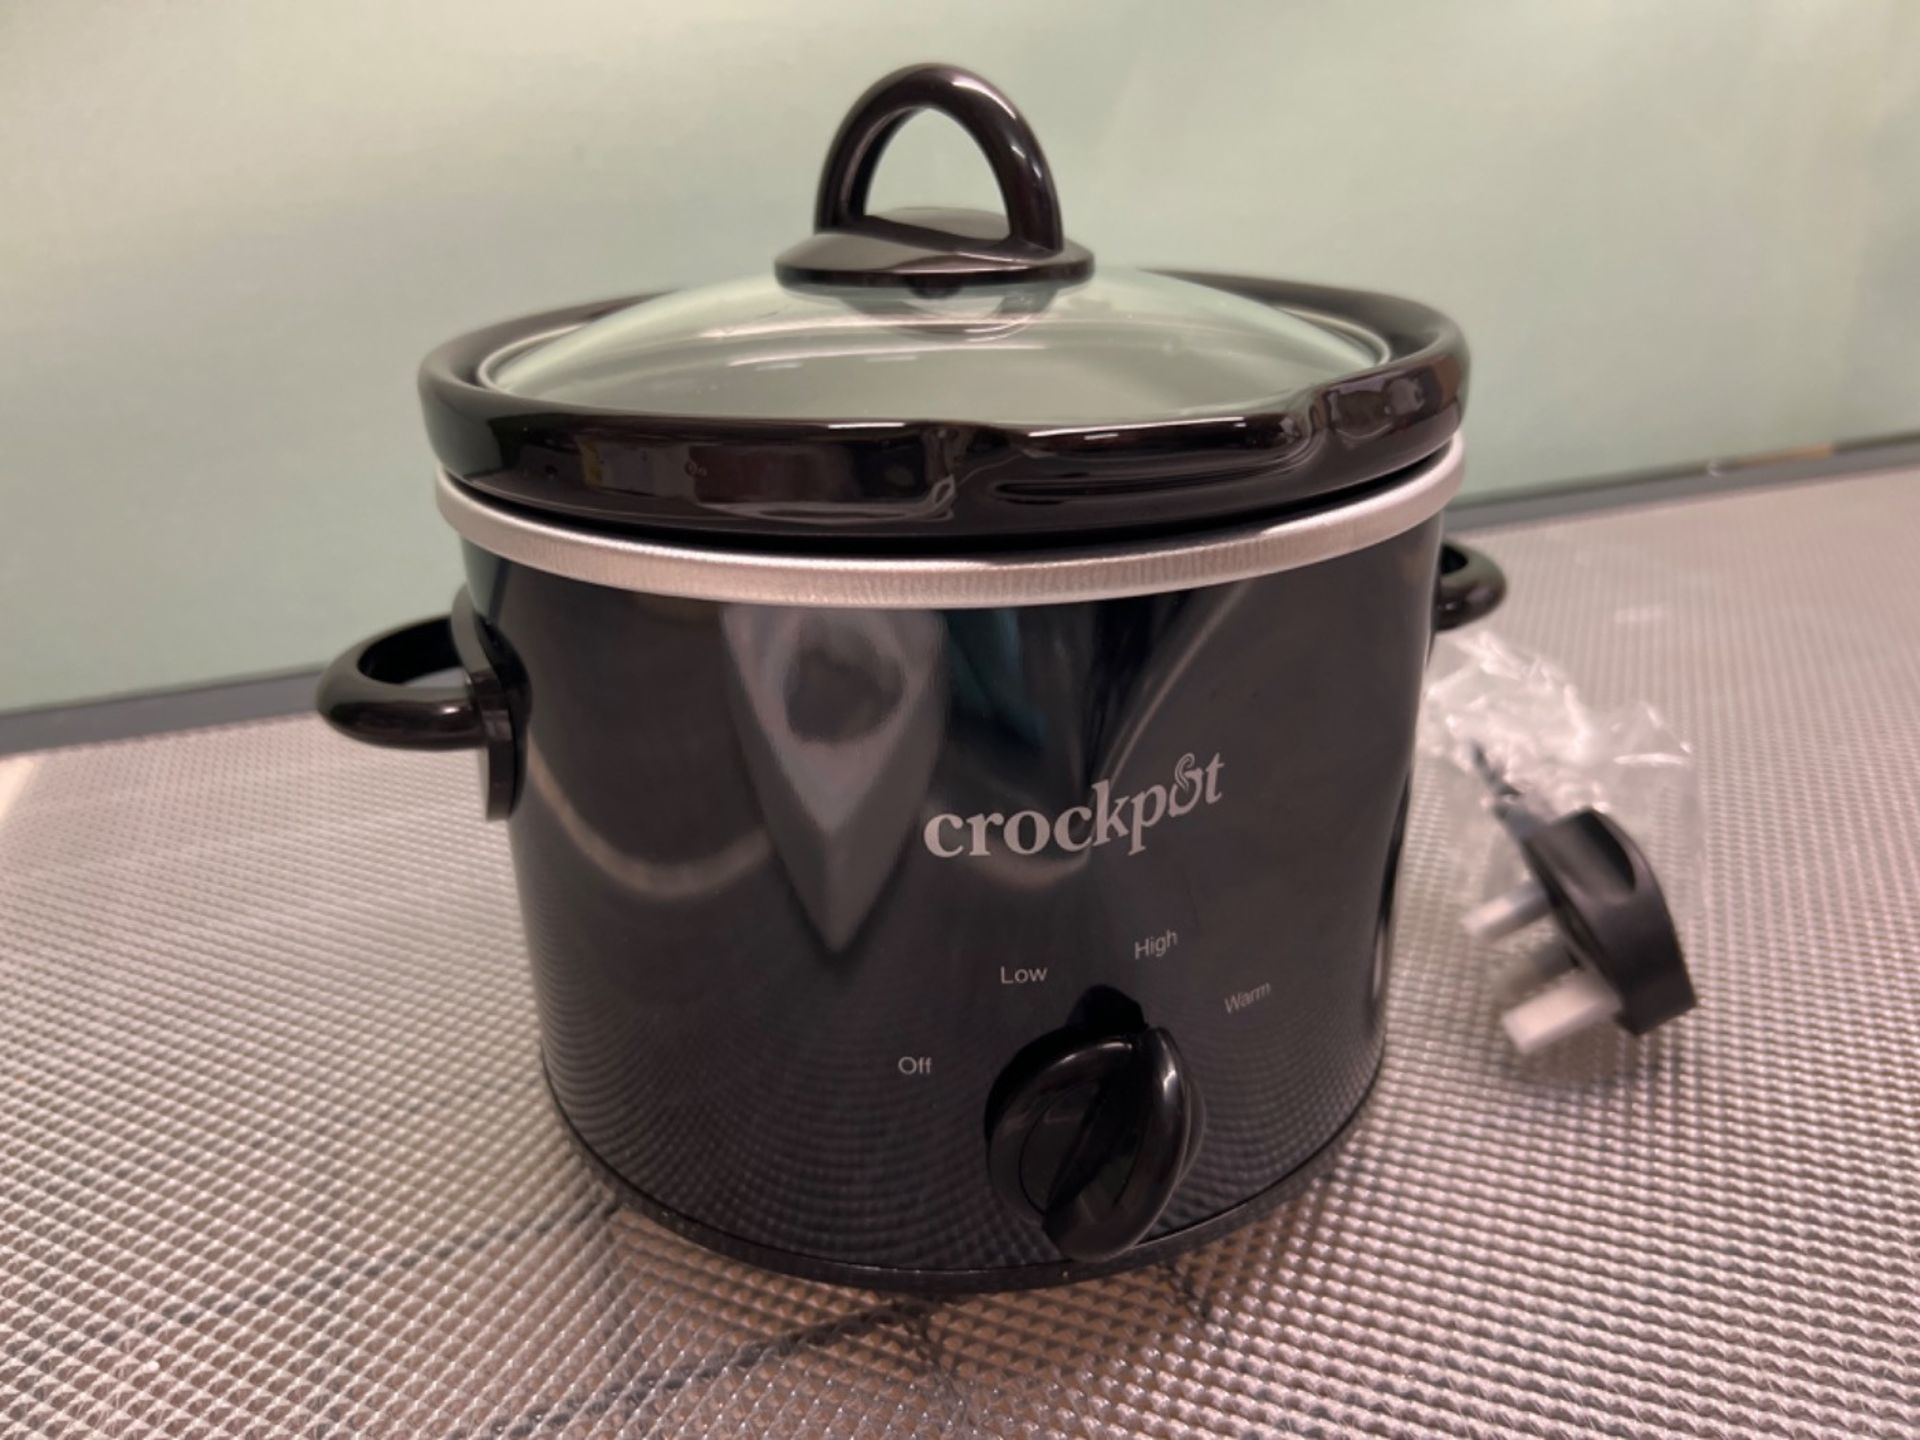 Crockpot Slow Cooker | Removable Easy-Clean Ceramic Bowl | 1.8 L Small Slow Cooker (Serves 1-2 Peop - Image 2 of 3